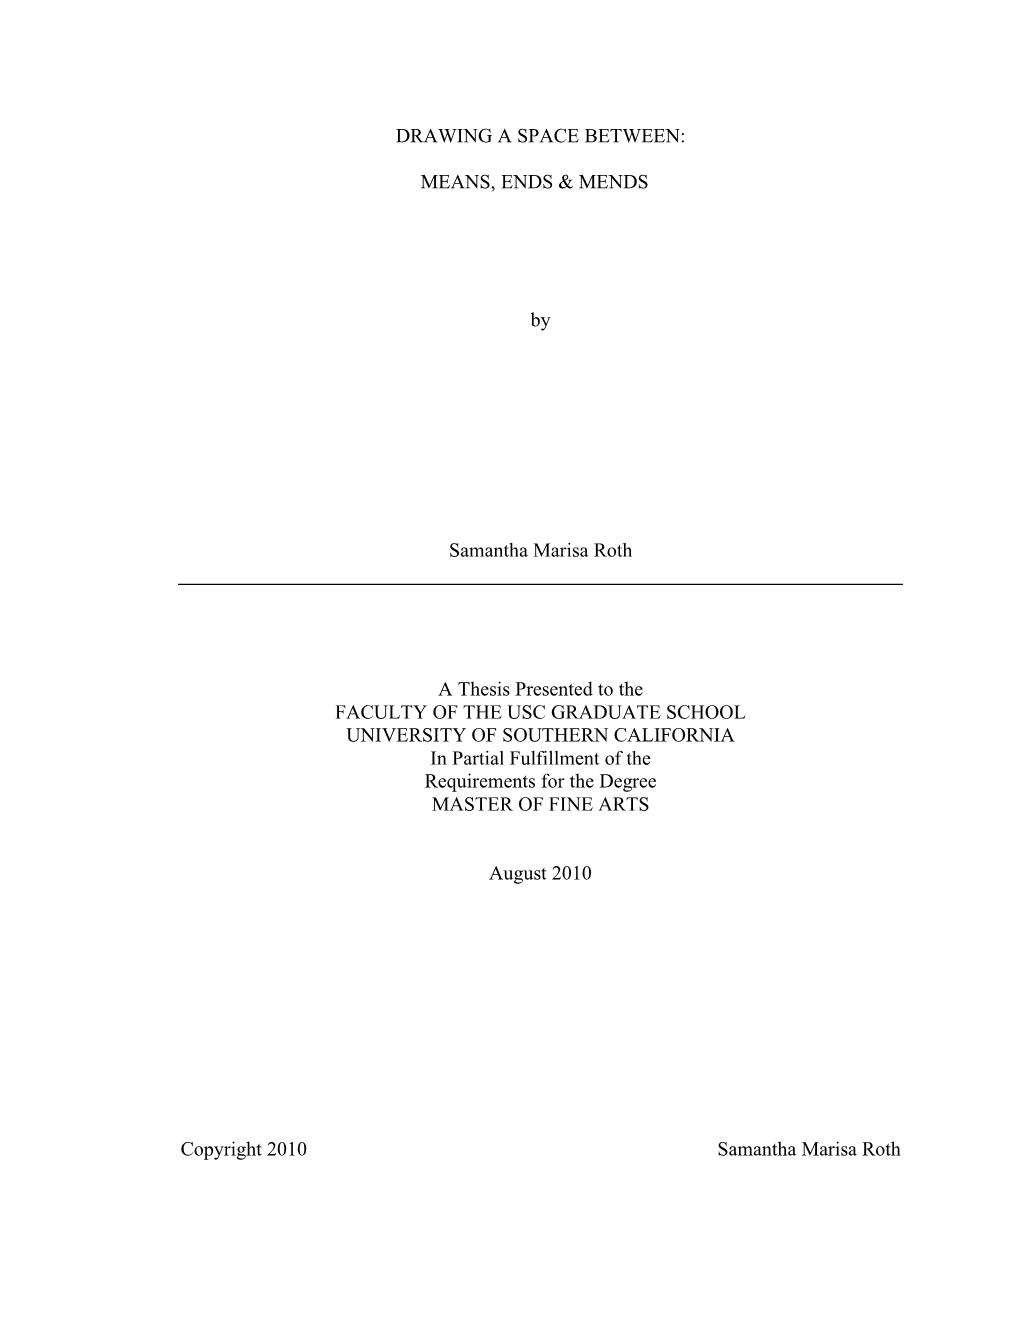 MEANS, ENDS & MENDS by Samantha Marisa Roth a Thesis